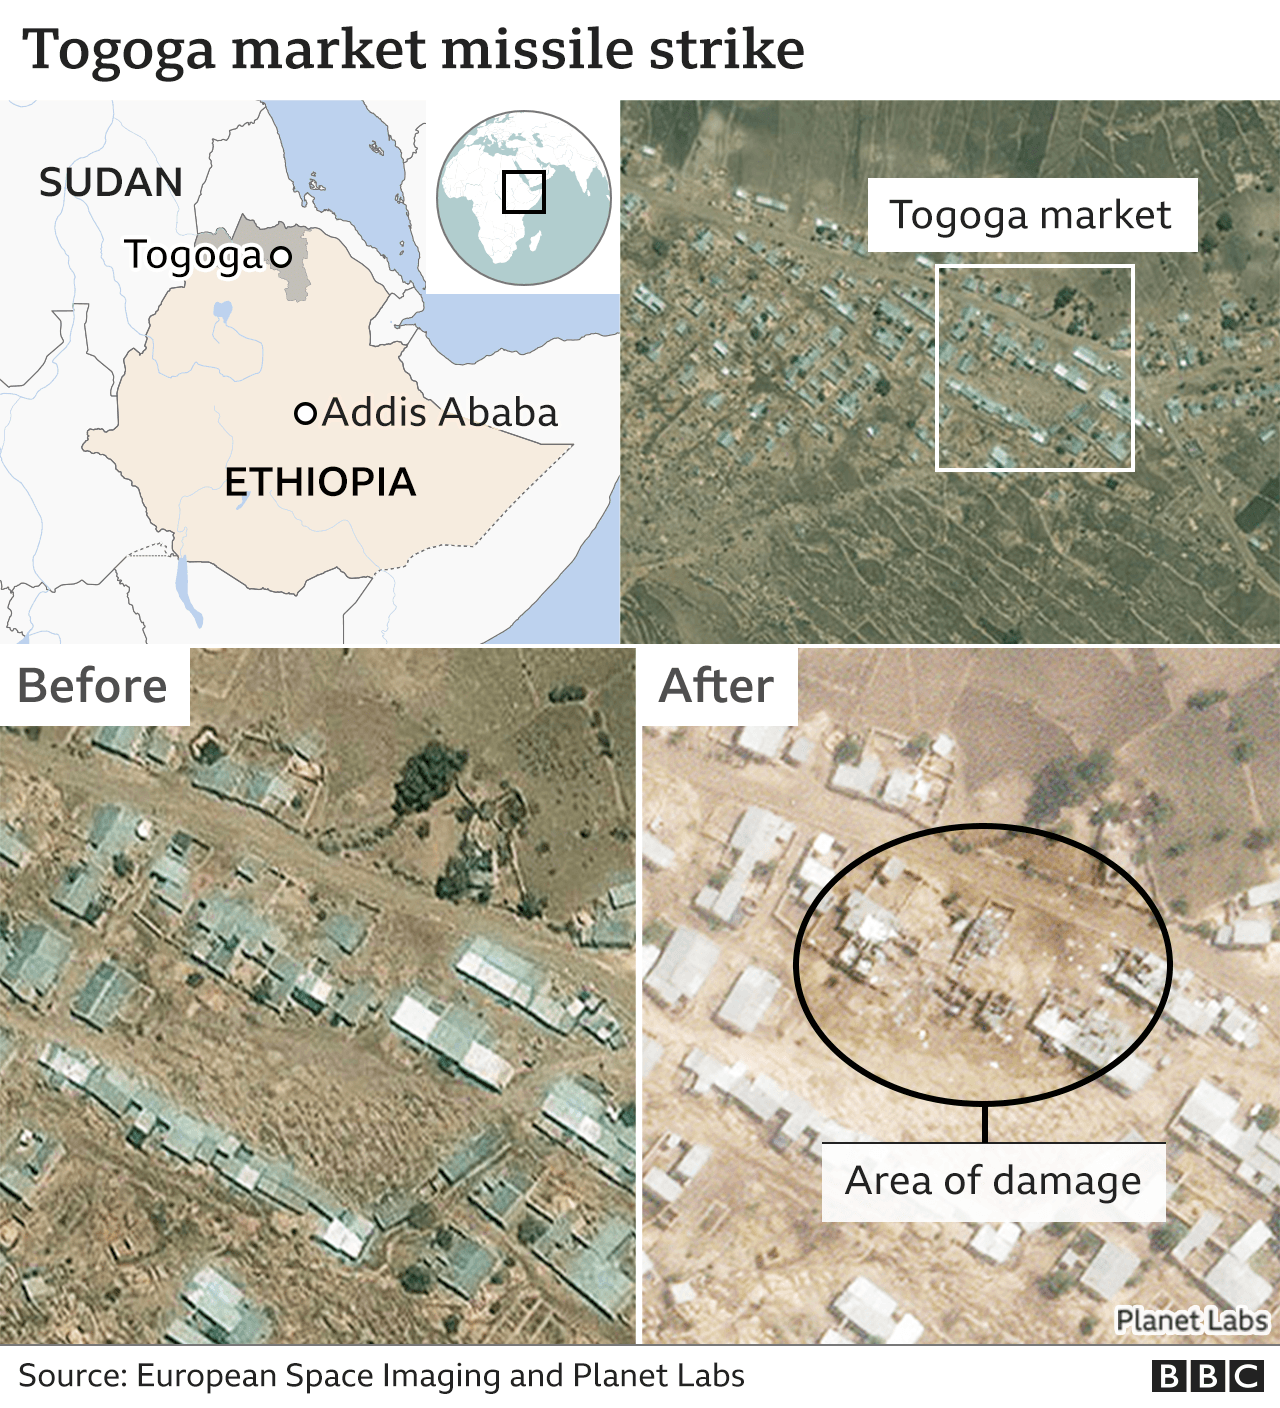 Satellite imagery of Togaga market in Tigray showing the before and after